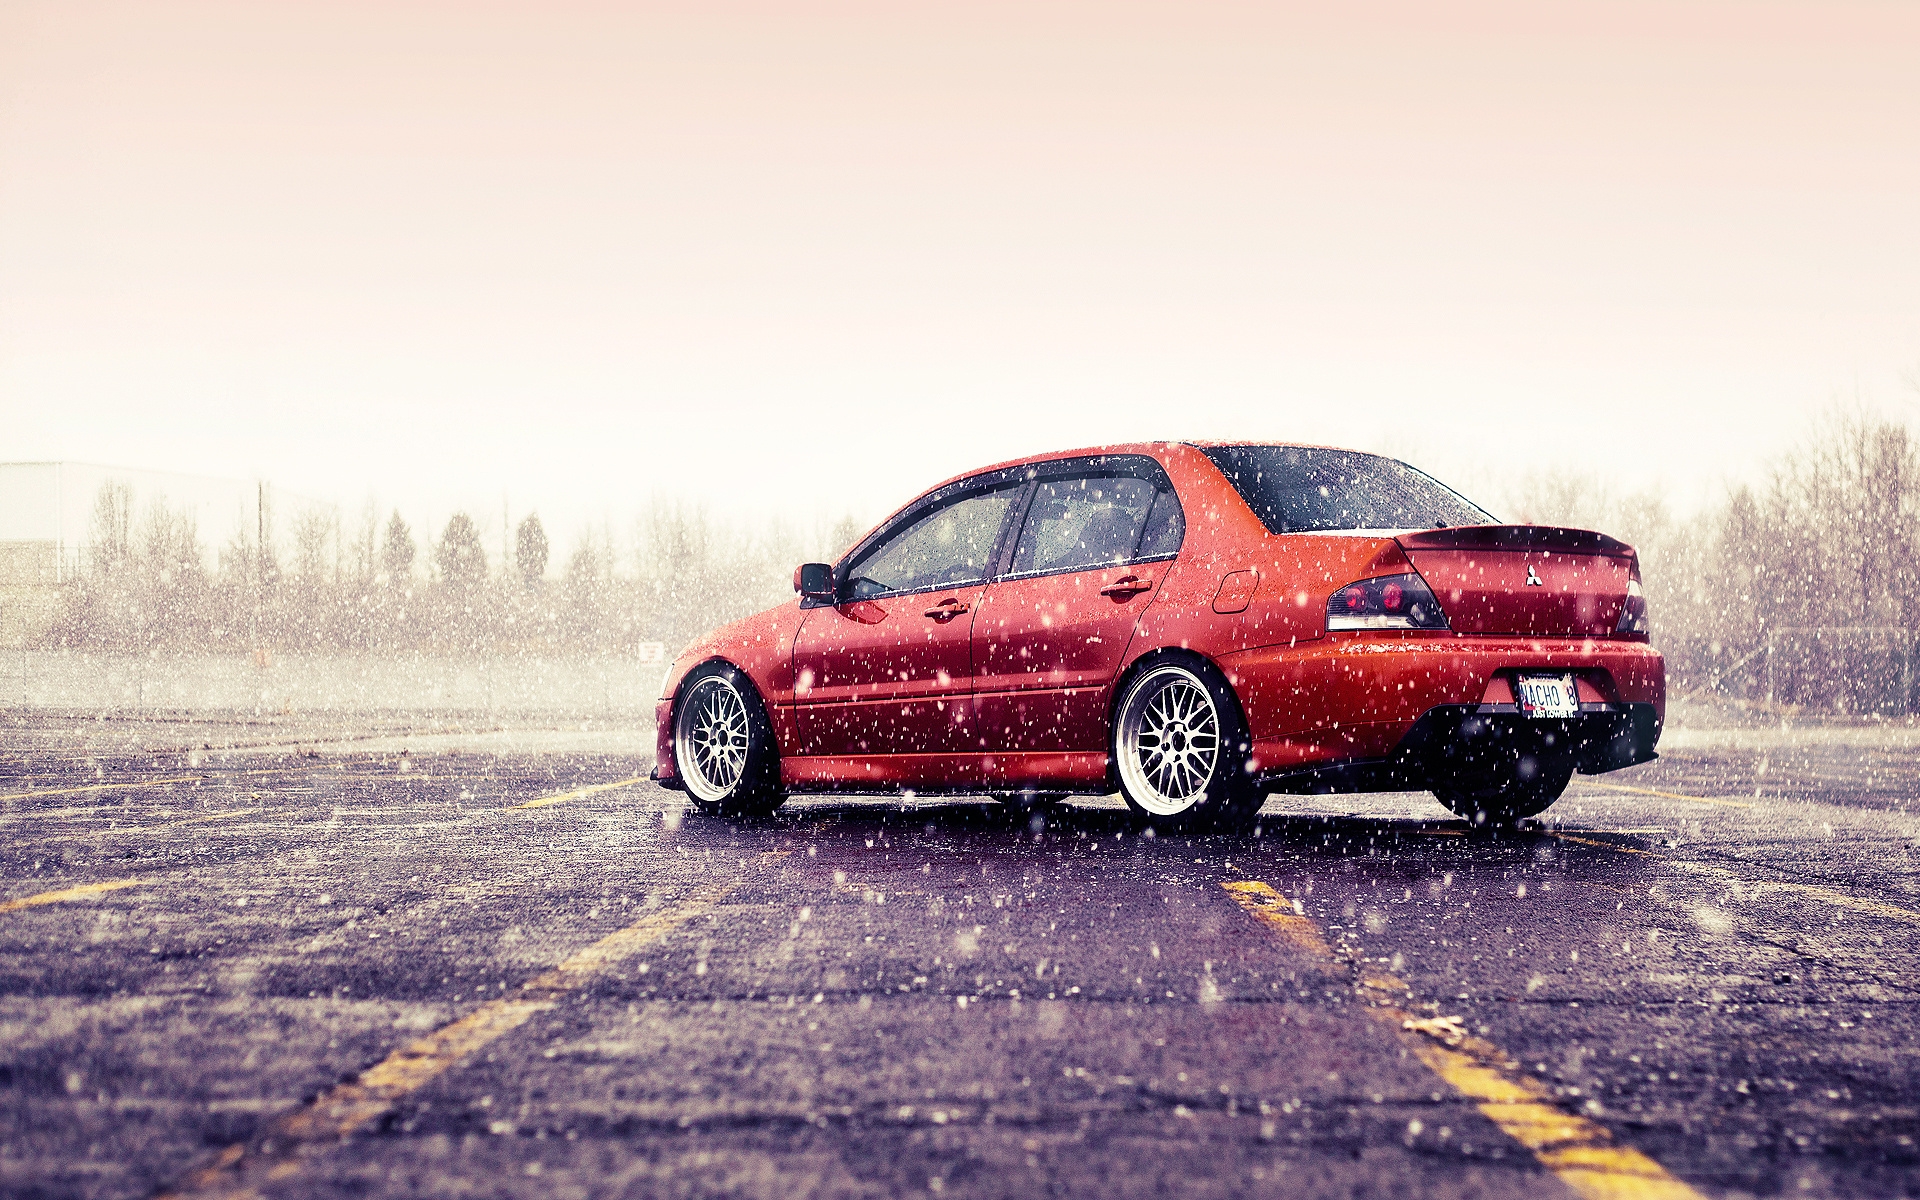 Mitsubishi lancer evo red on BBS rims in snowy weather